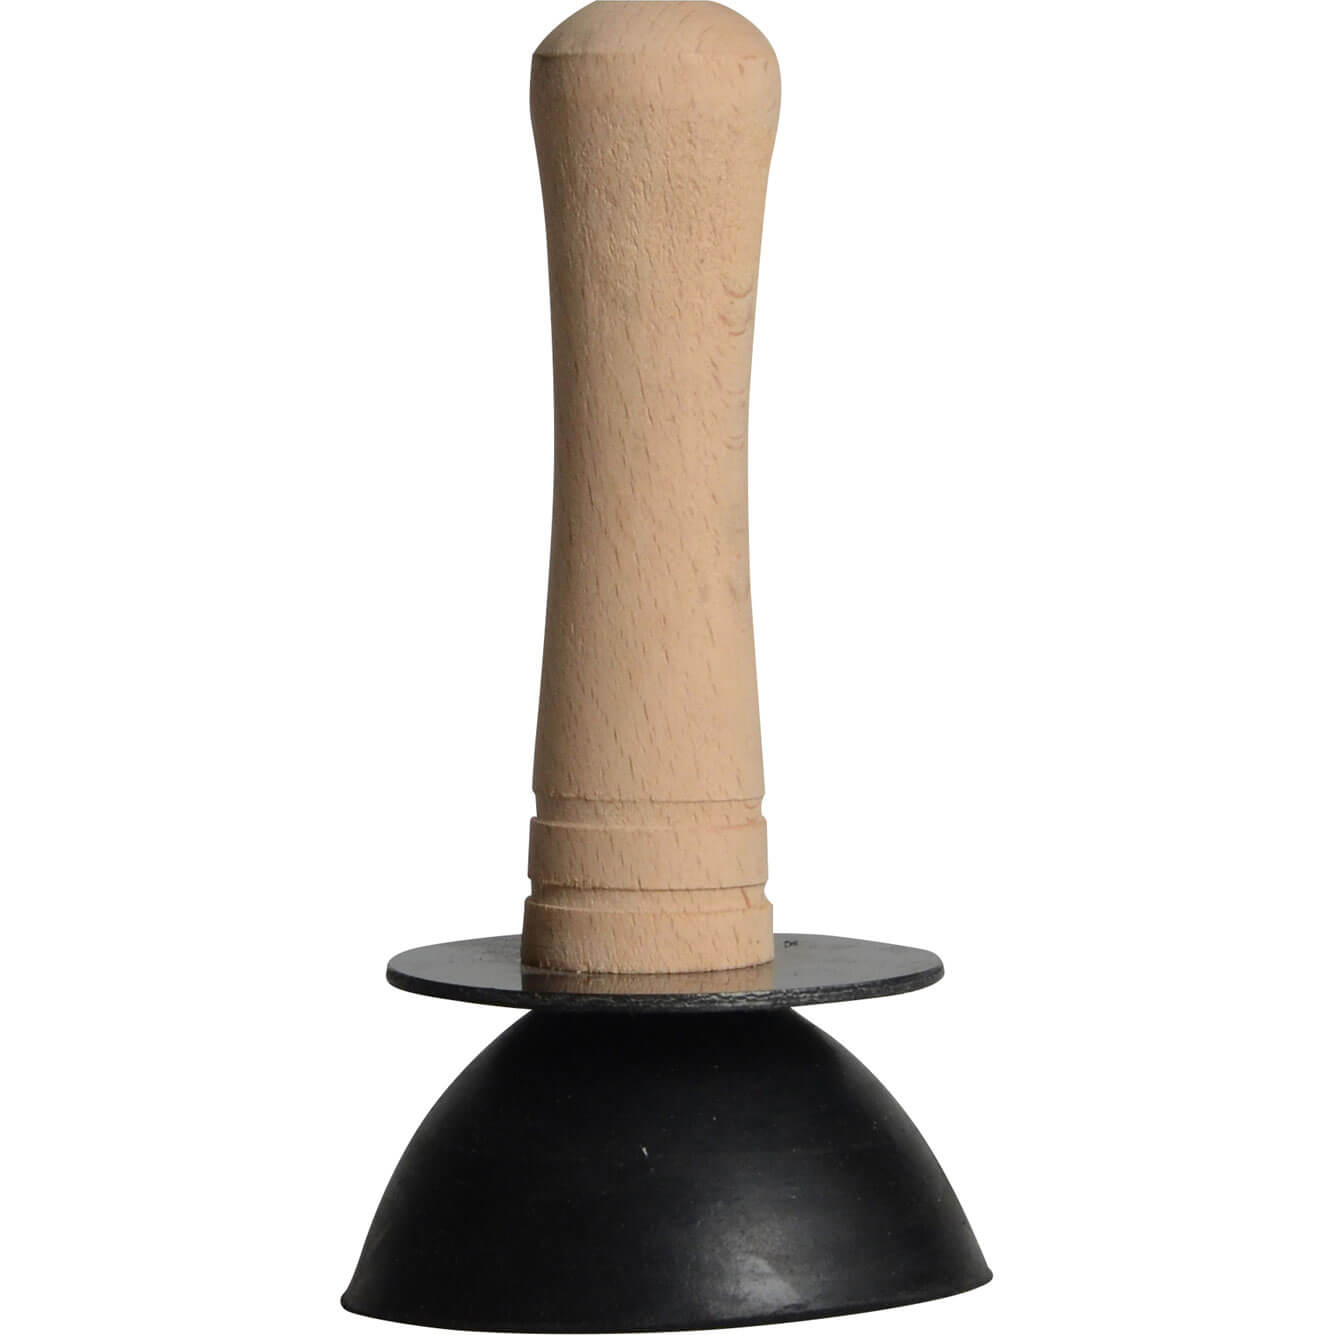 Image of Monument Force Sink Plunger 75mm